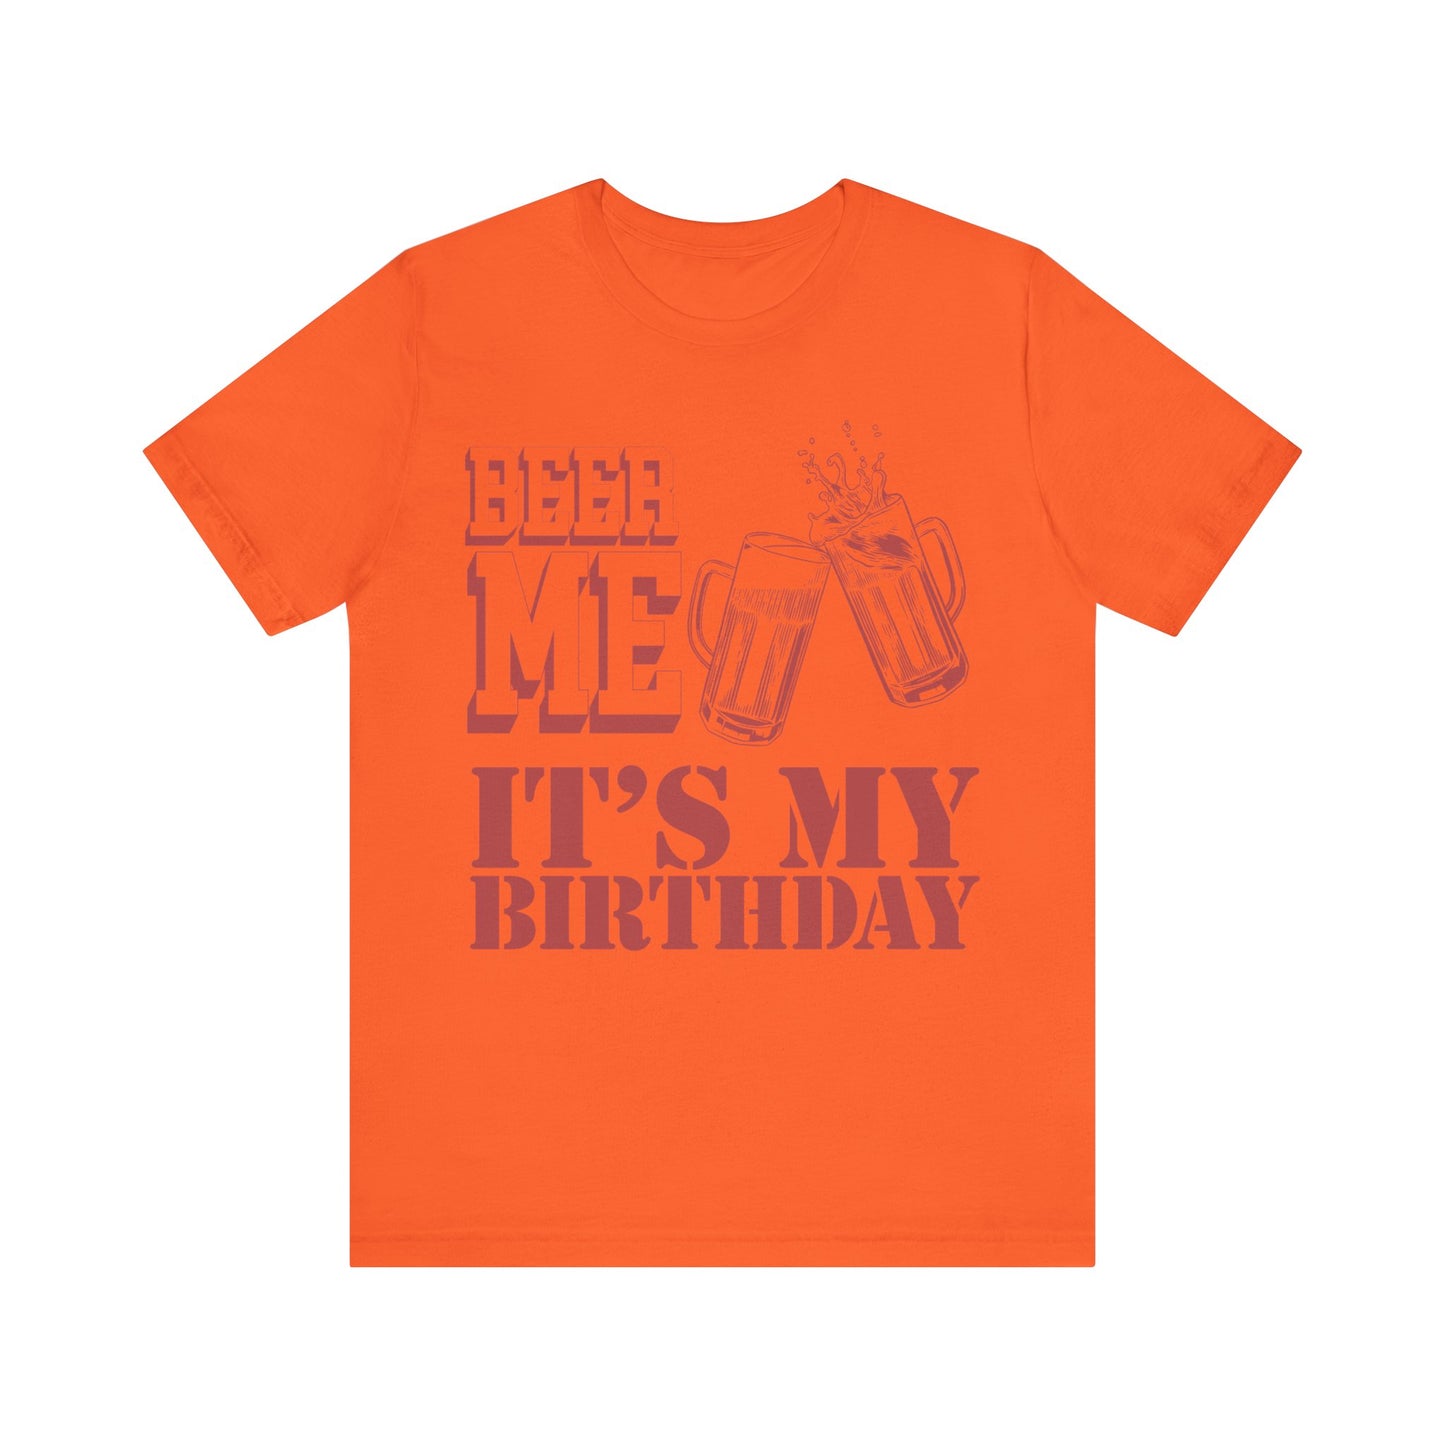 Beer Me It's My Birthday Shirt, Funny Birthday Shirt for Dad, Daddy Shirt, Funny Dad's Birthday Shirt, Best Beer Lover Dad Shirt, T1572